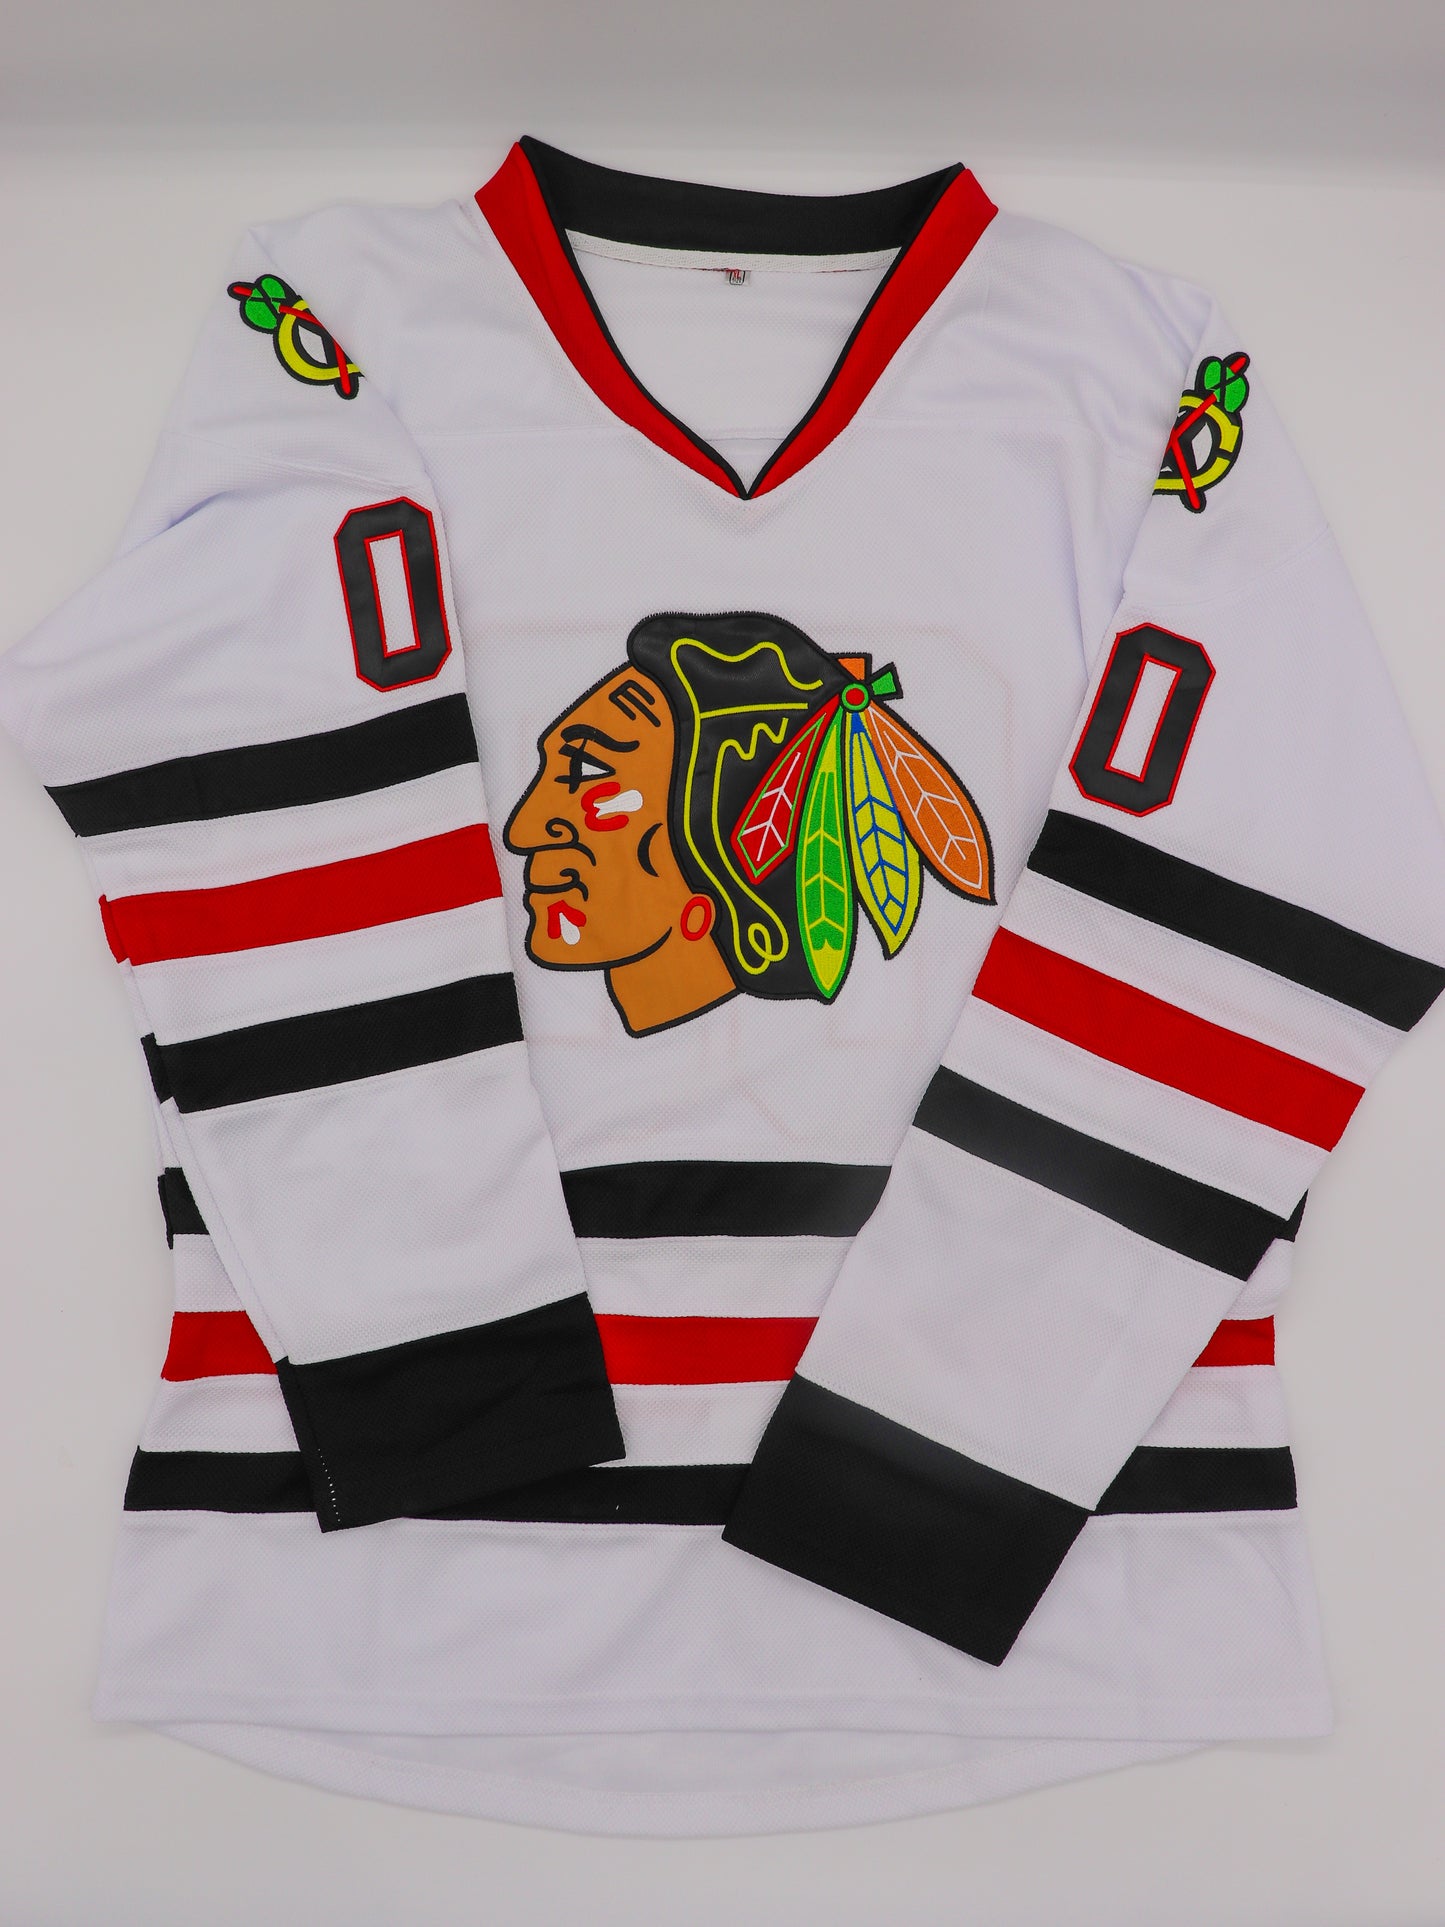 to Die for Collectibles National Lampoon’s Christmas Vacation Clark Griswold Chicago Blackhawks Jersey, White #00, Size XL, New